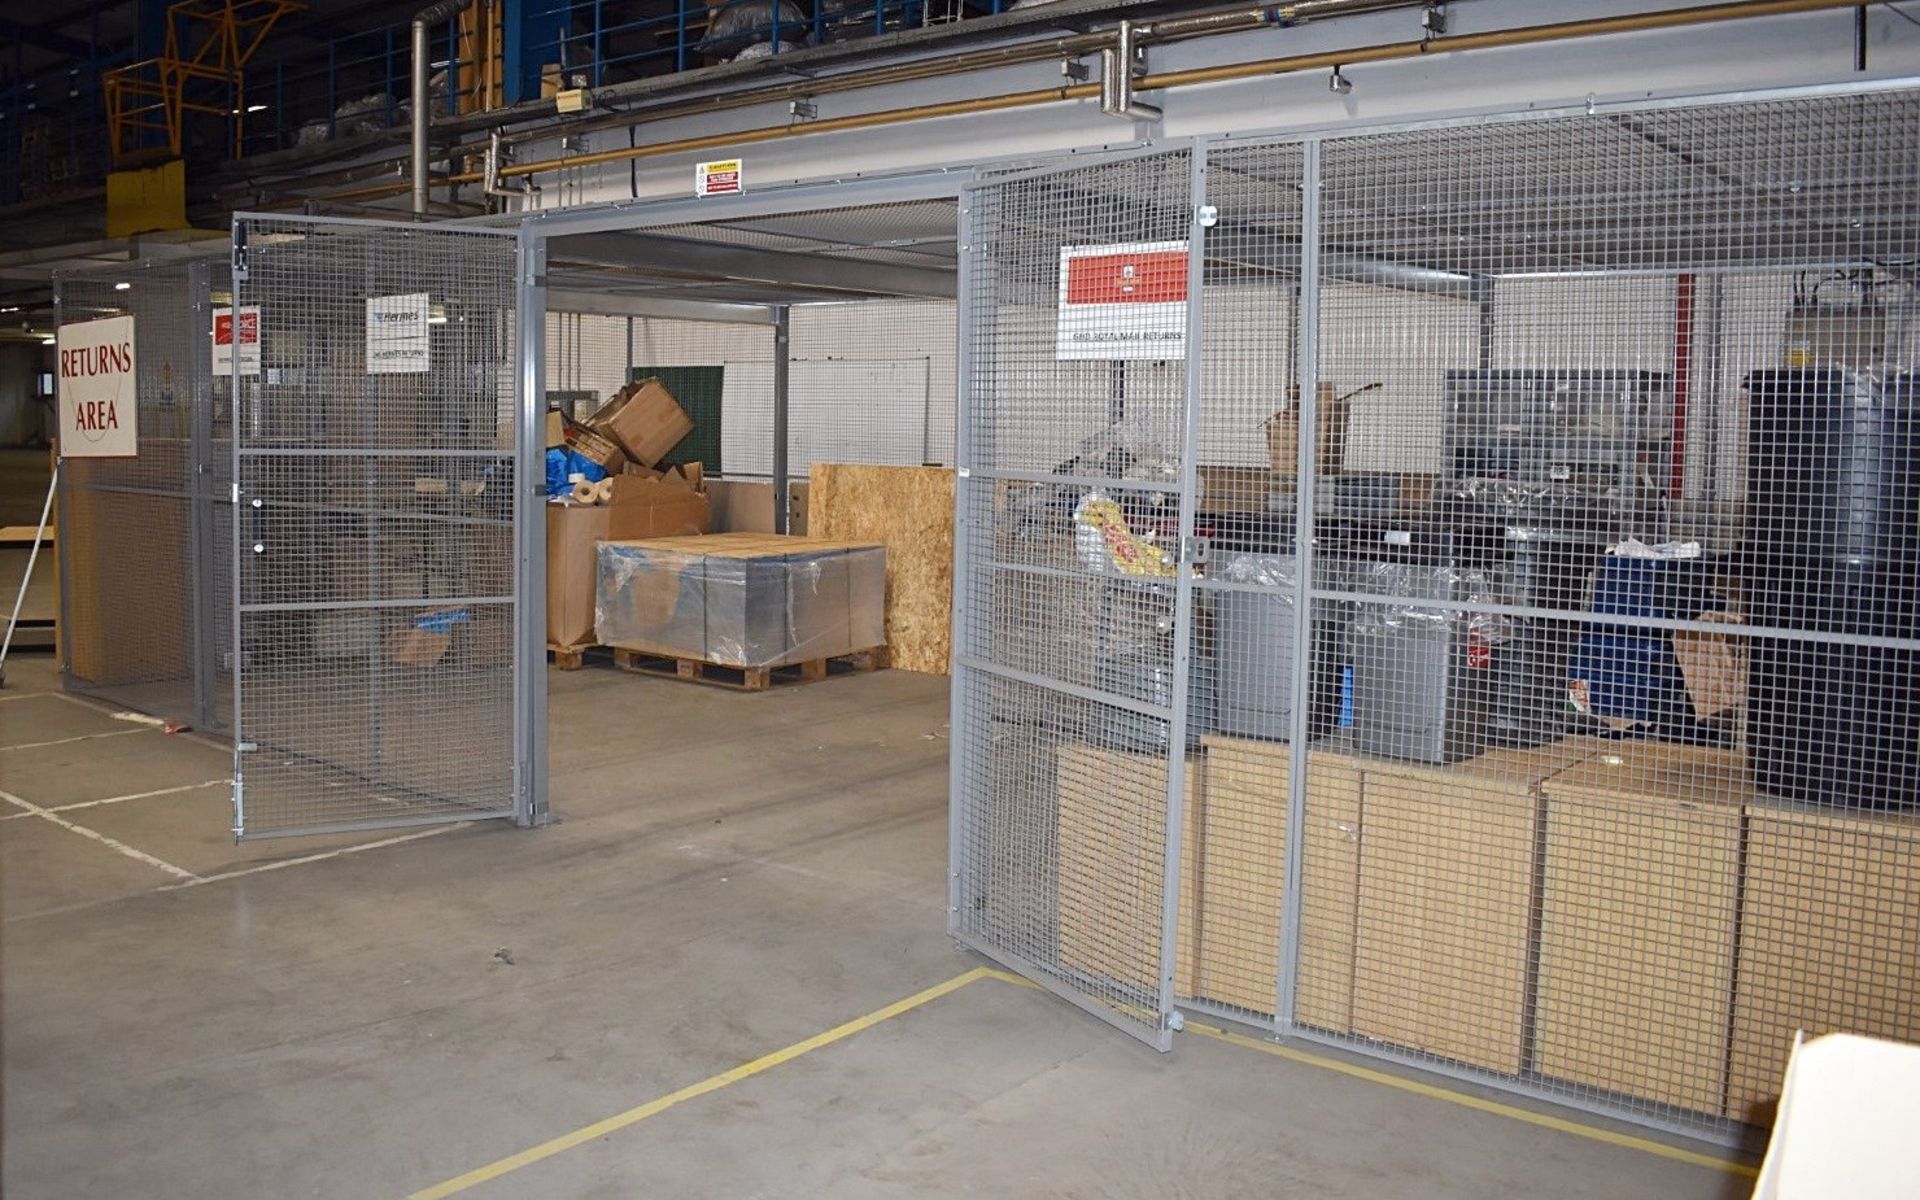 1 x Security Cage Enclosure For Warehouses - Ideal For Storing High-Value Stock or Hazardous Goods - - Image 5 of 12